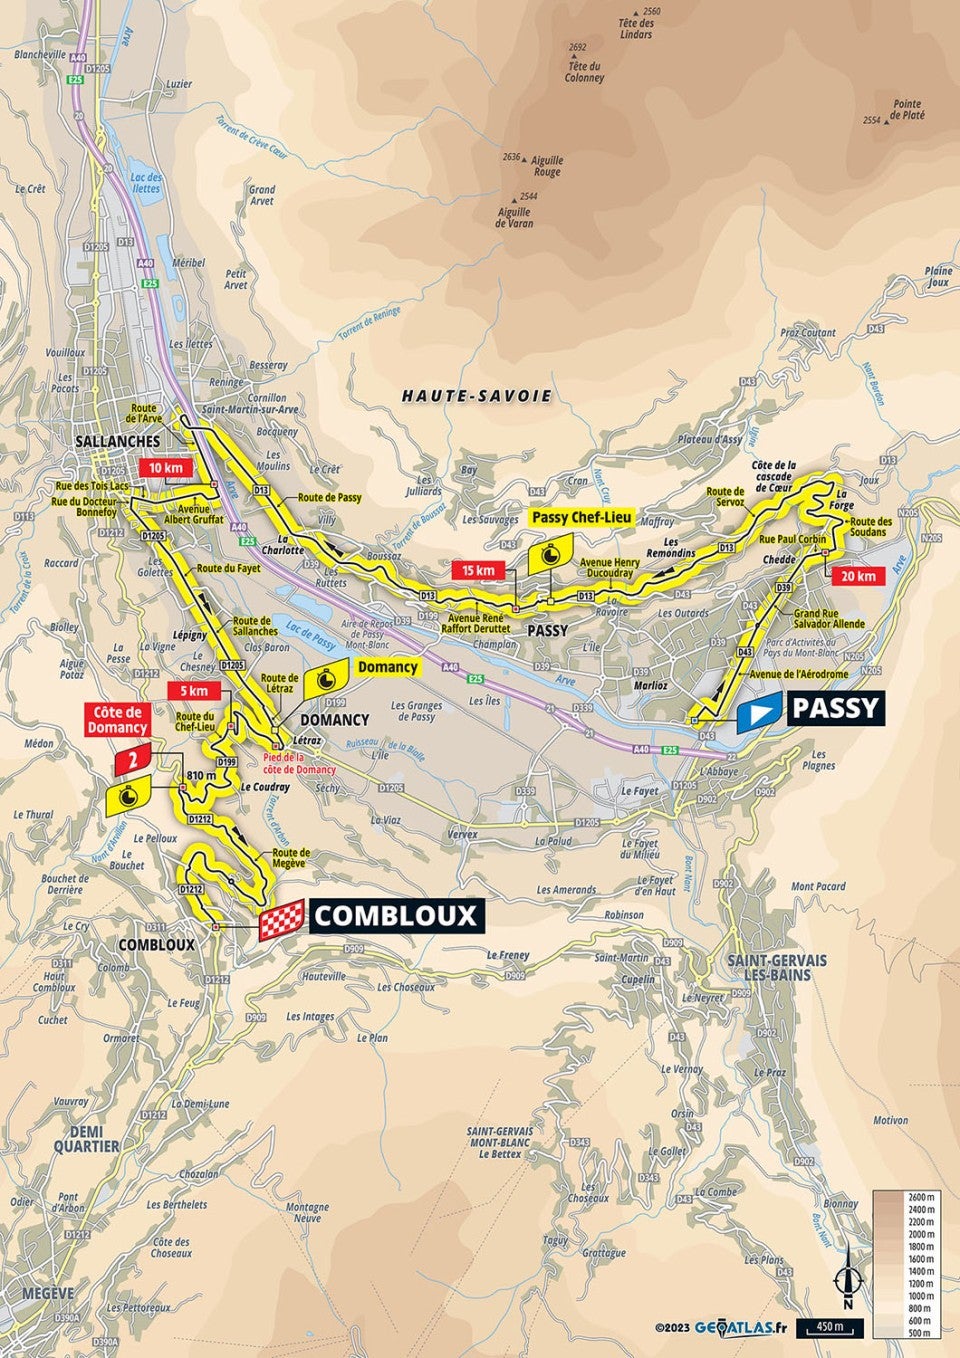 Tour de France 2023 stage 16 preview Route map and profile of 22km